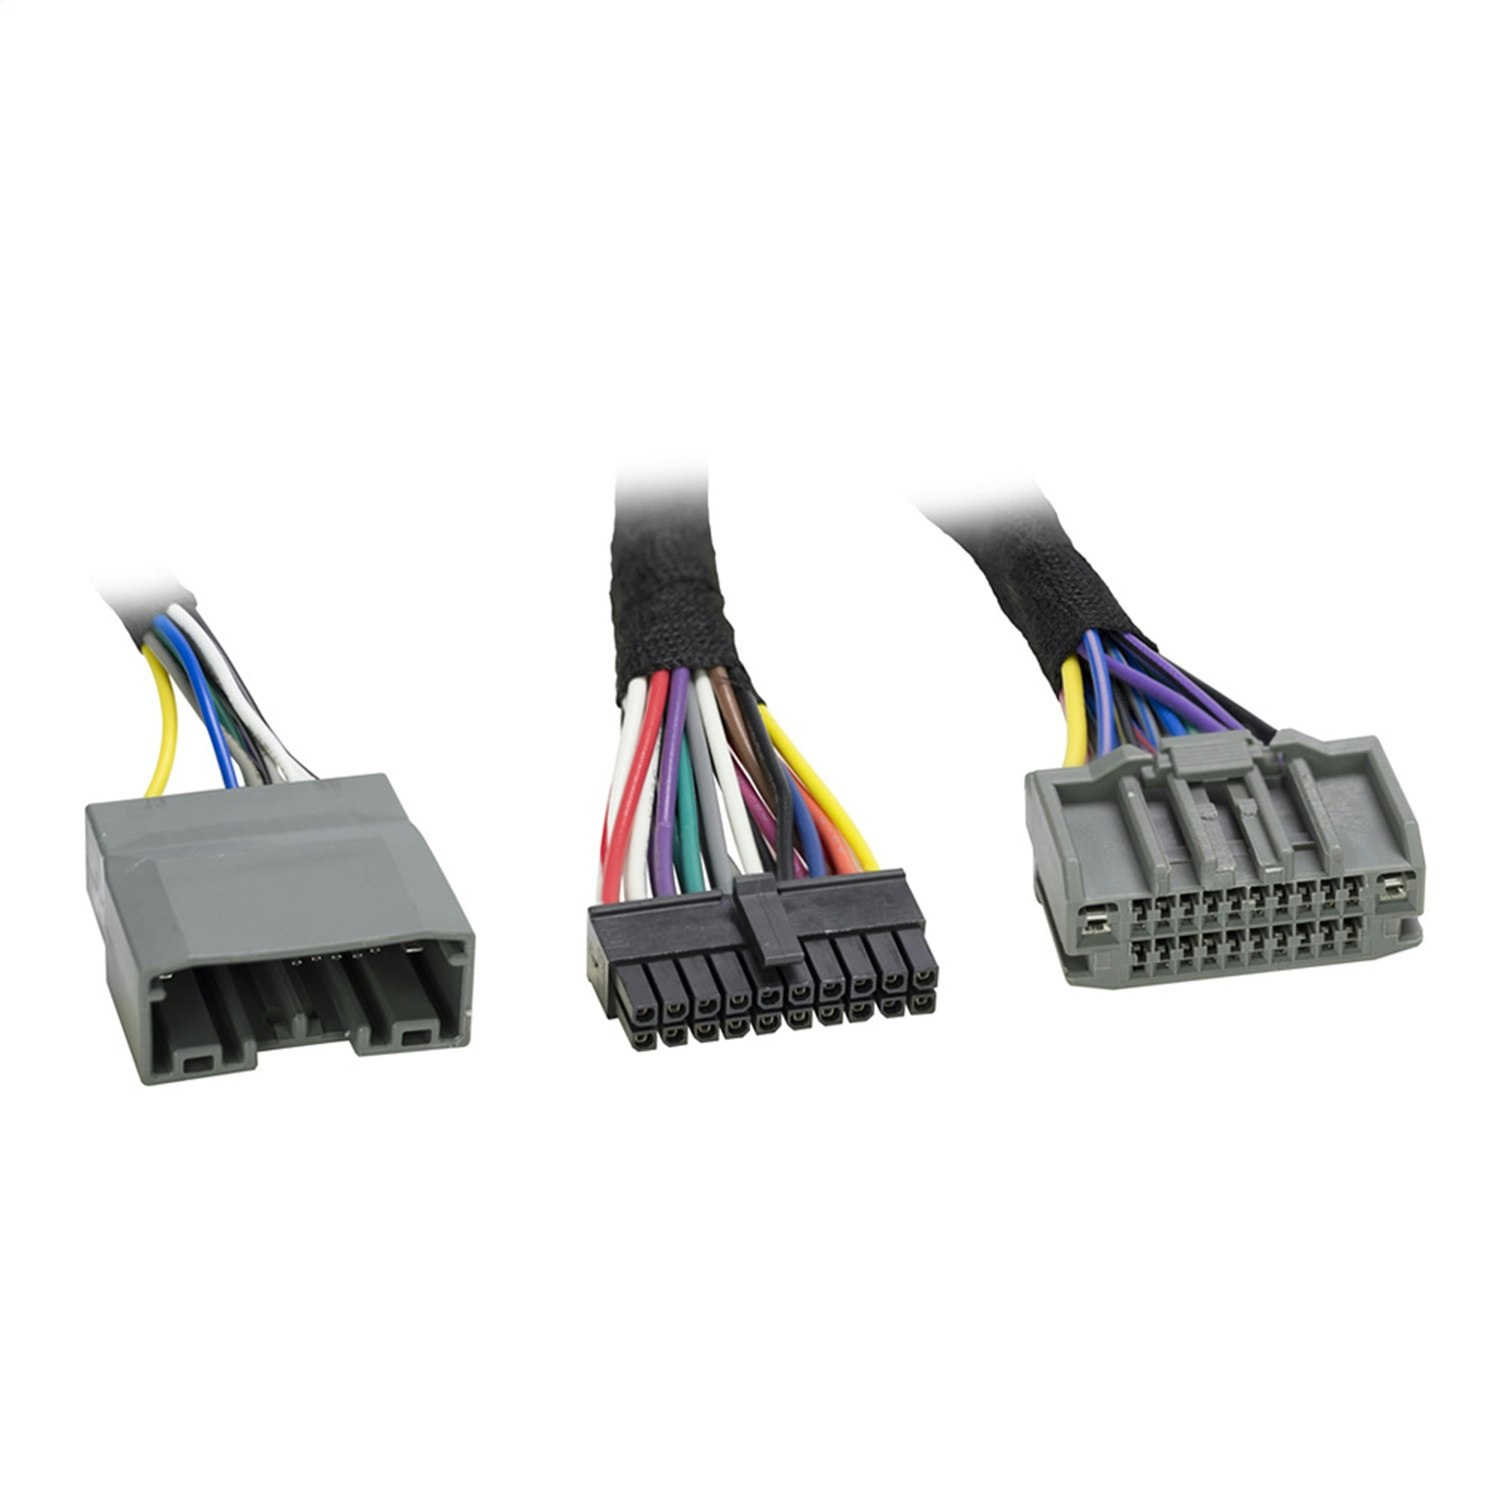 AX-DSP-CH4 AXXESS METRA Chrysler Jeep Plug-n-Play T-harness for AX-DSP